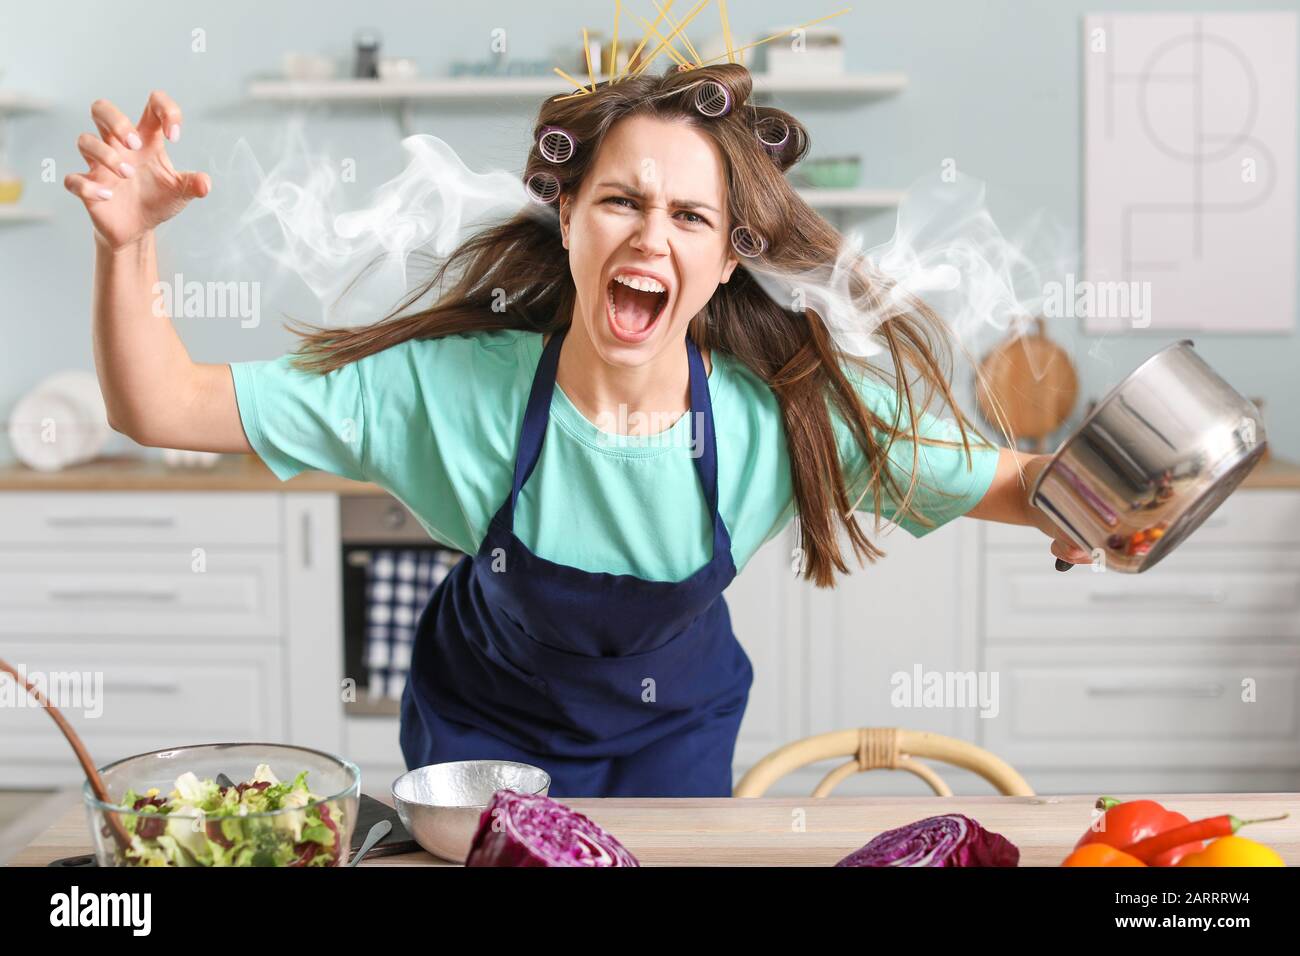 Aggressive young housewife with steam coming out of ears in kitchen Stock Photo